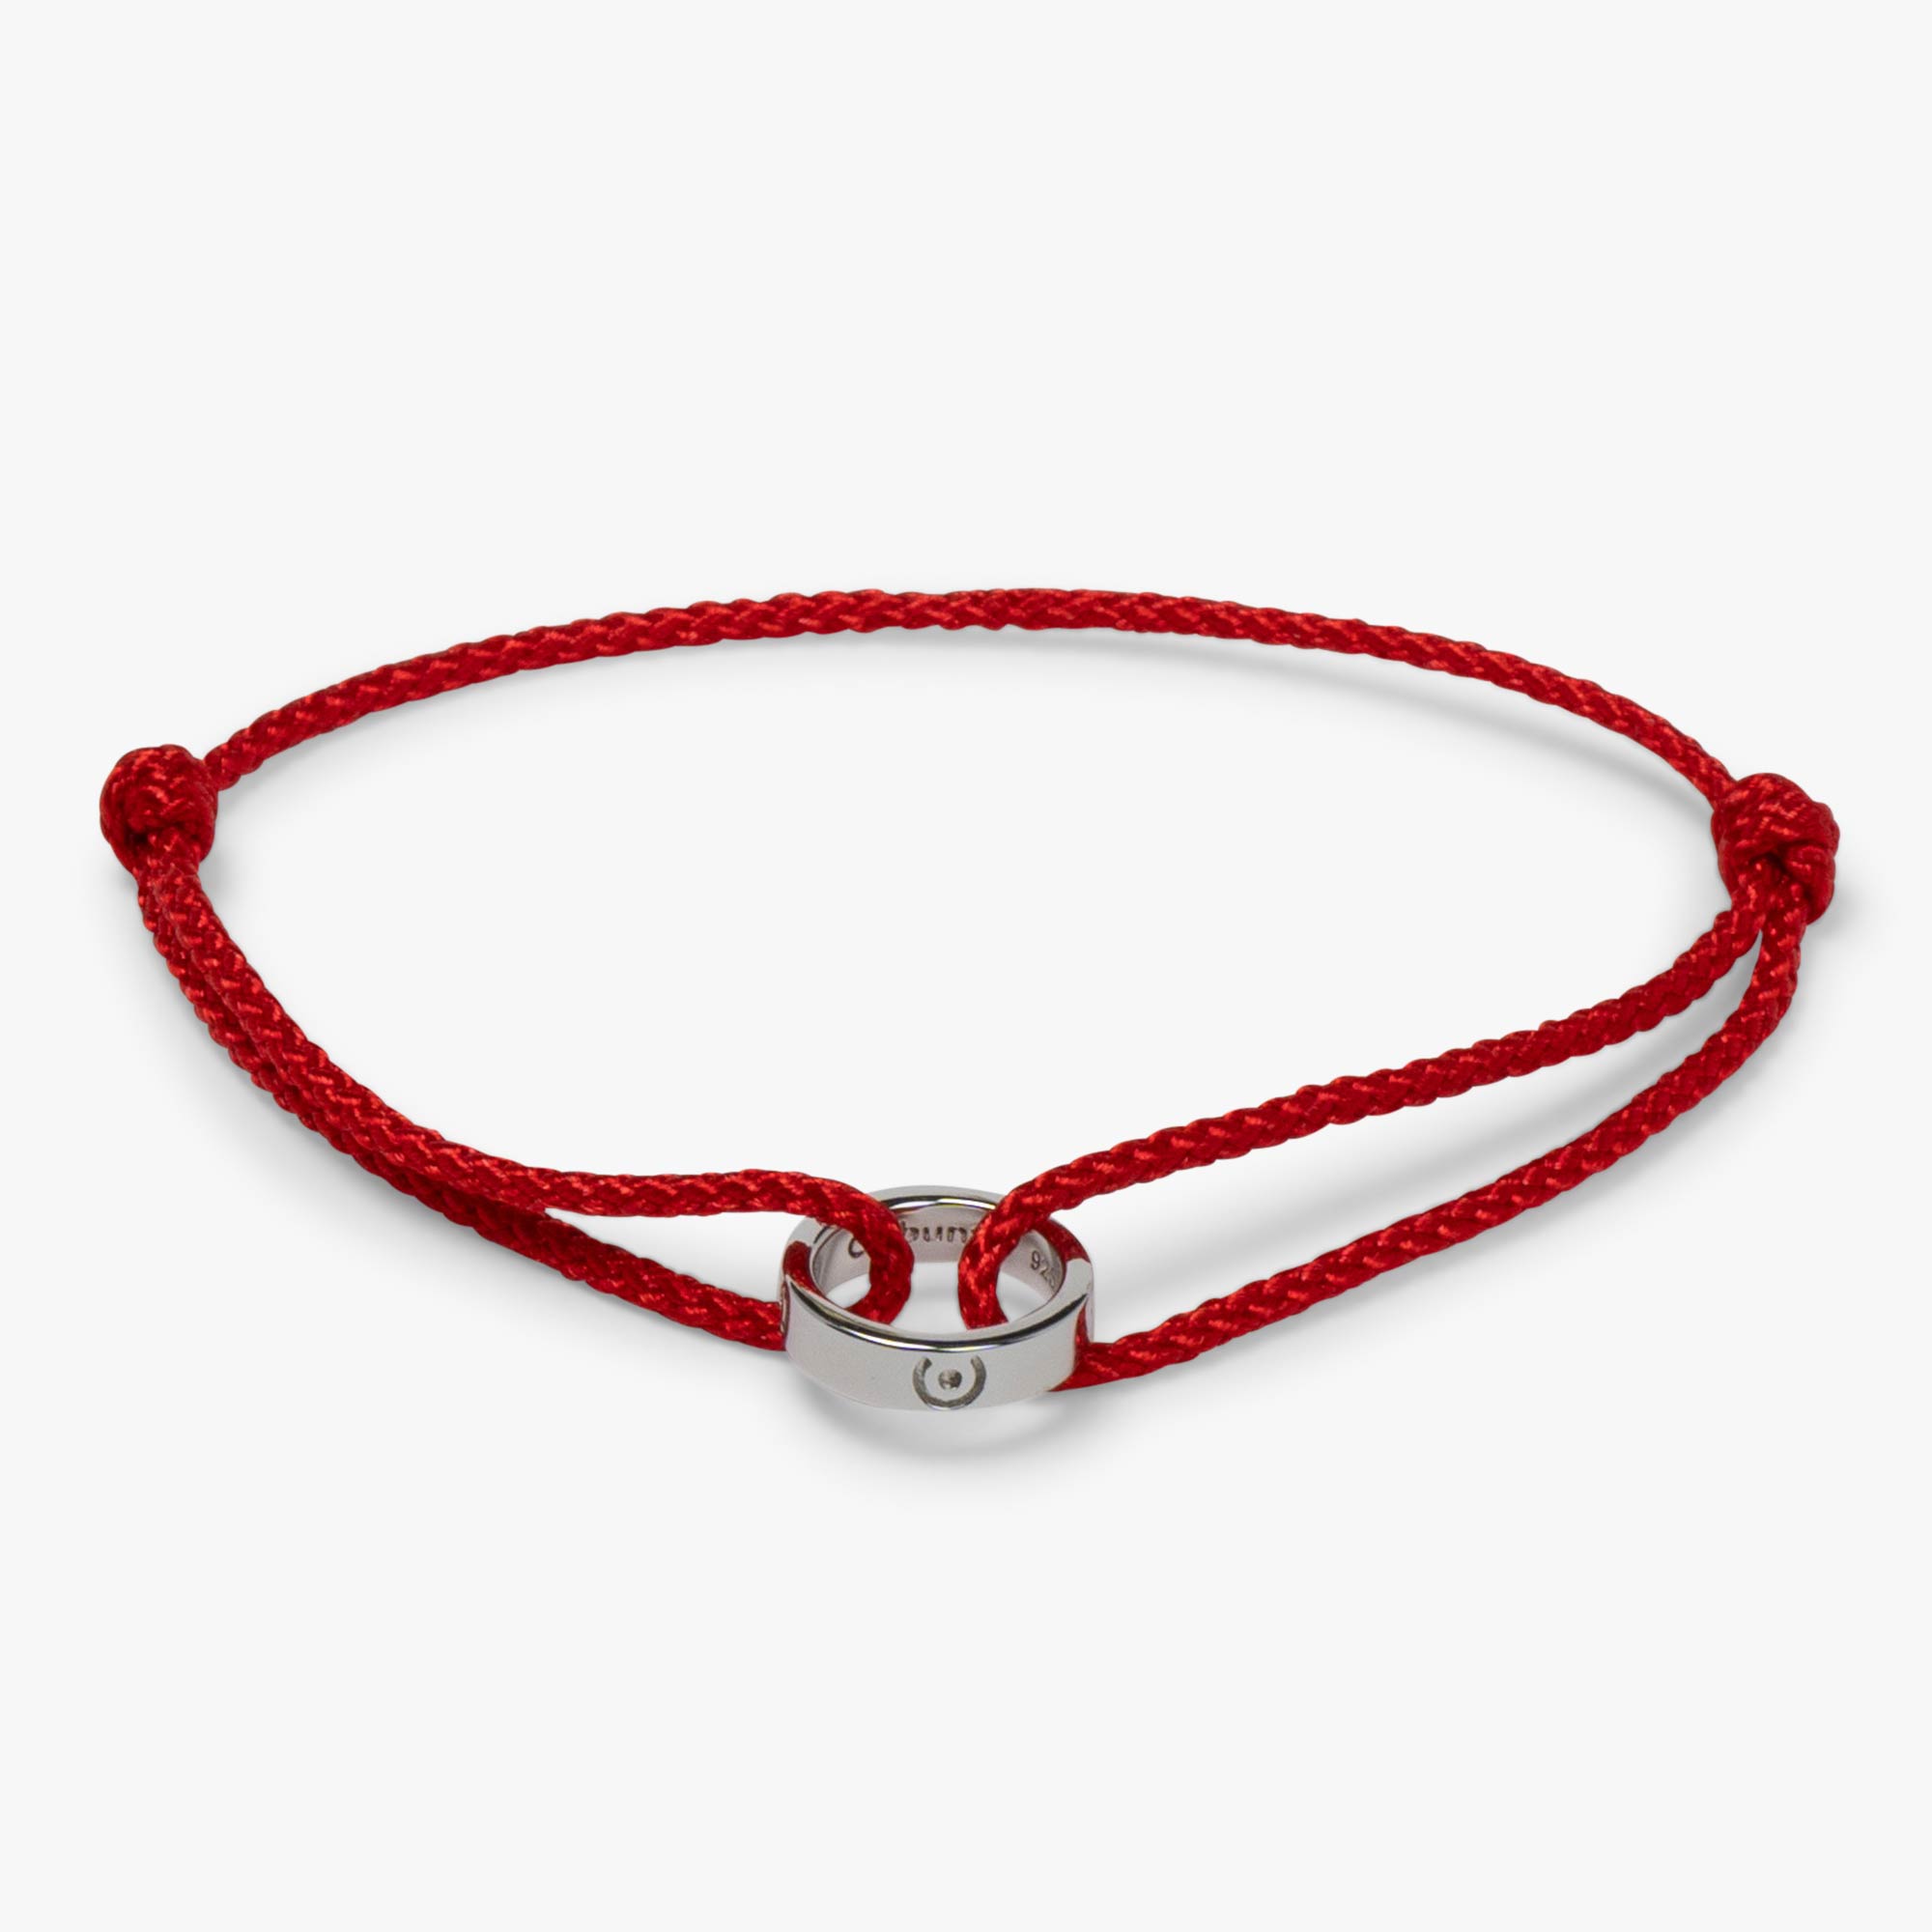 The Significance & Meaning of Red Bracelets